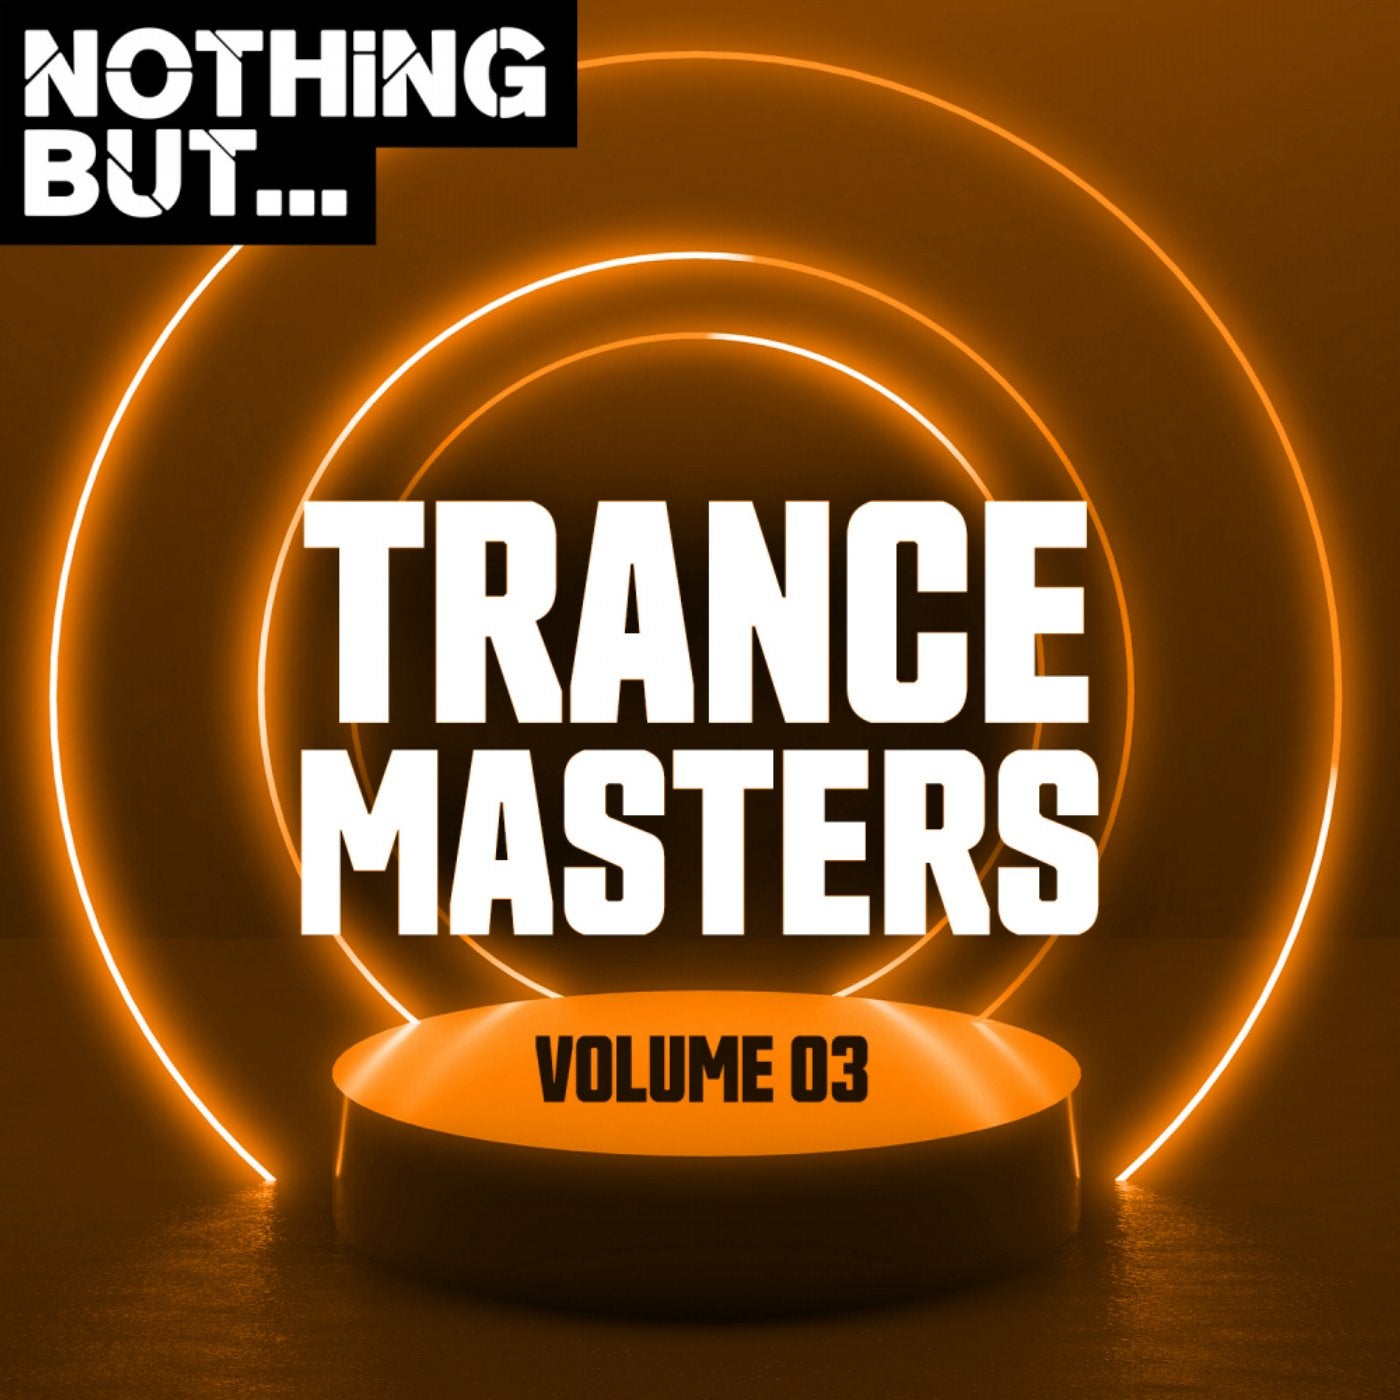 Nothing But... Trance Masters, Vol. 03